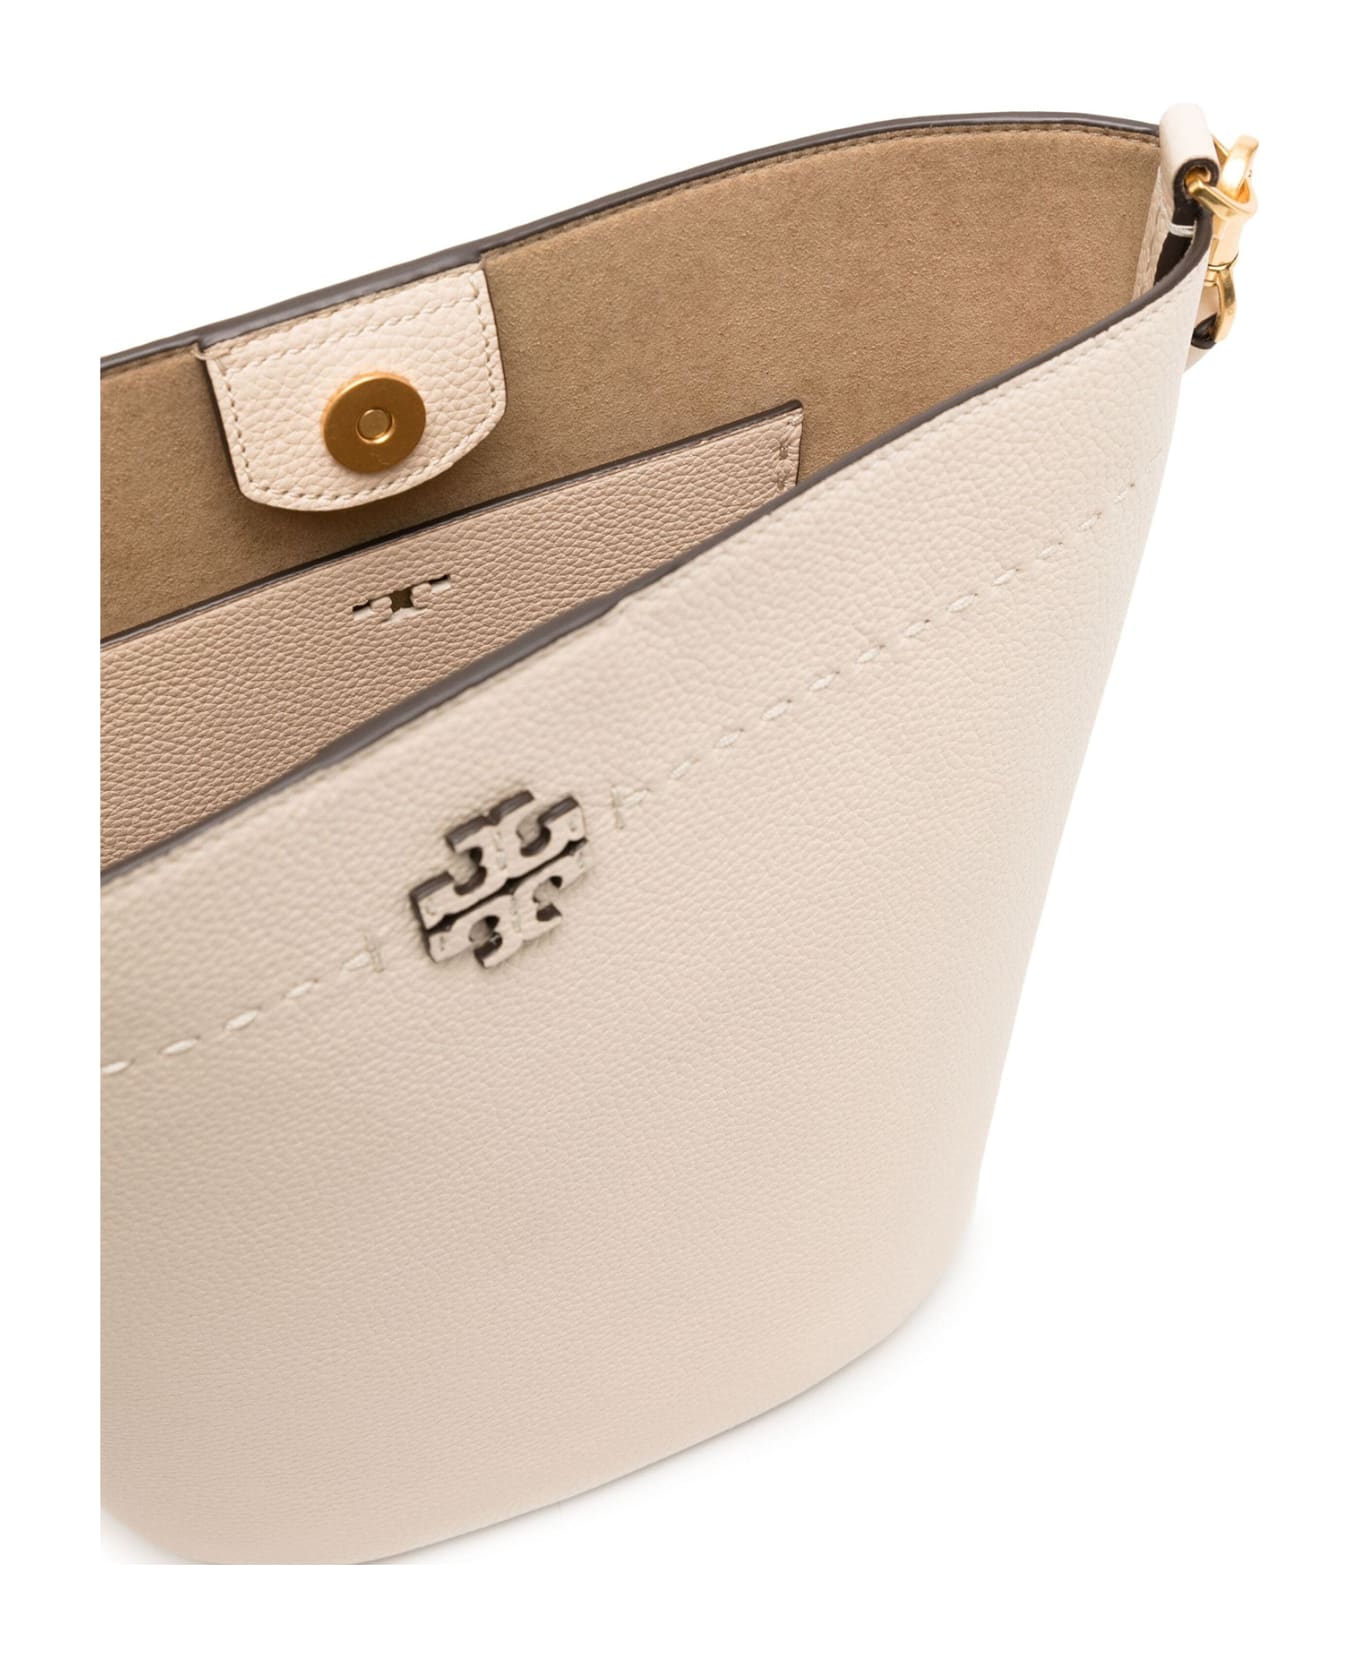 Tory Burch Mcgraw Leather Bucket Bag - BRIE